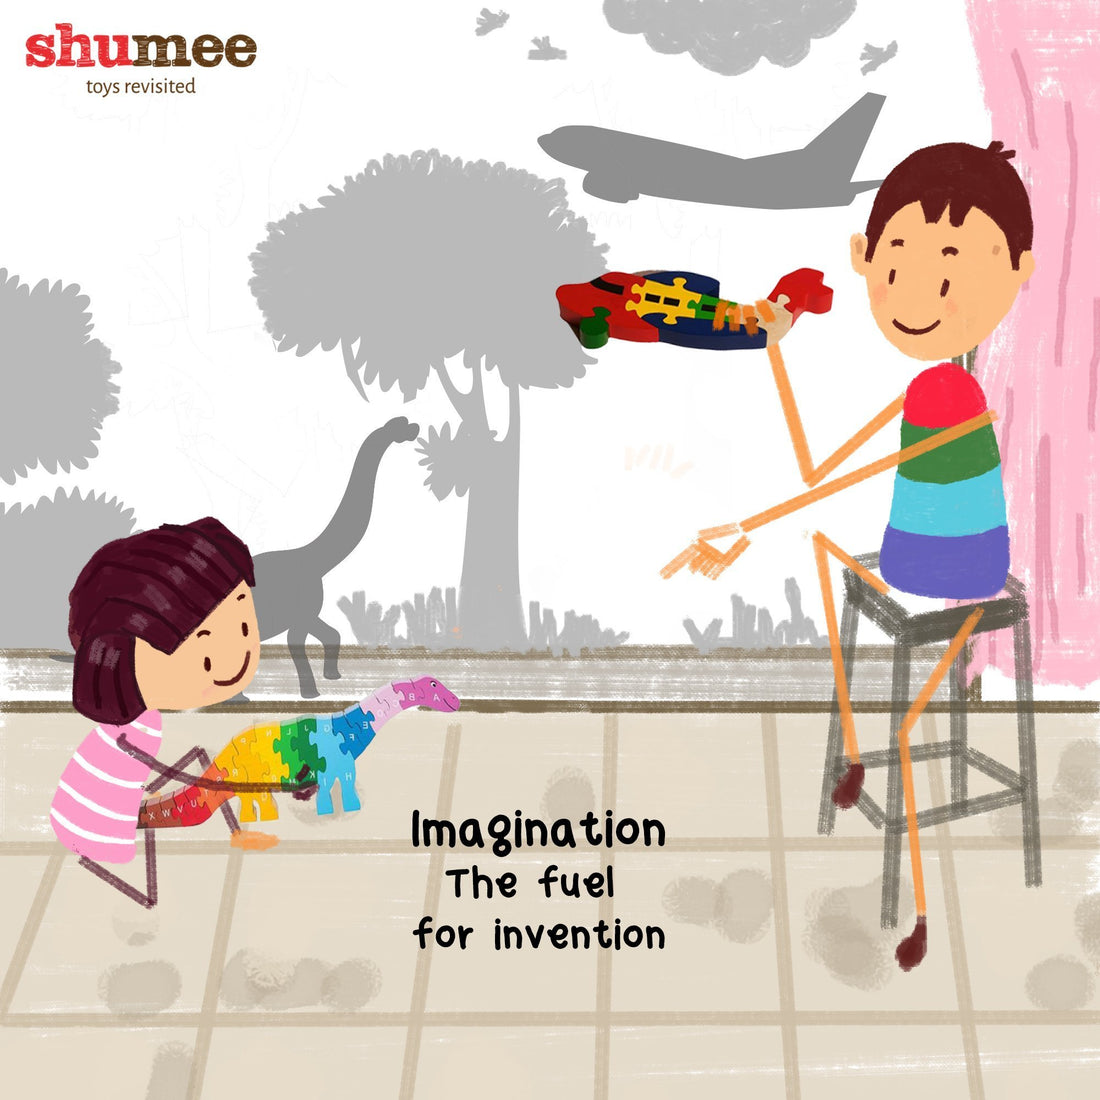 Kids, inventions and the power of imagination